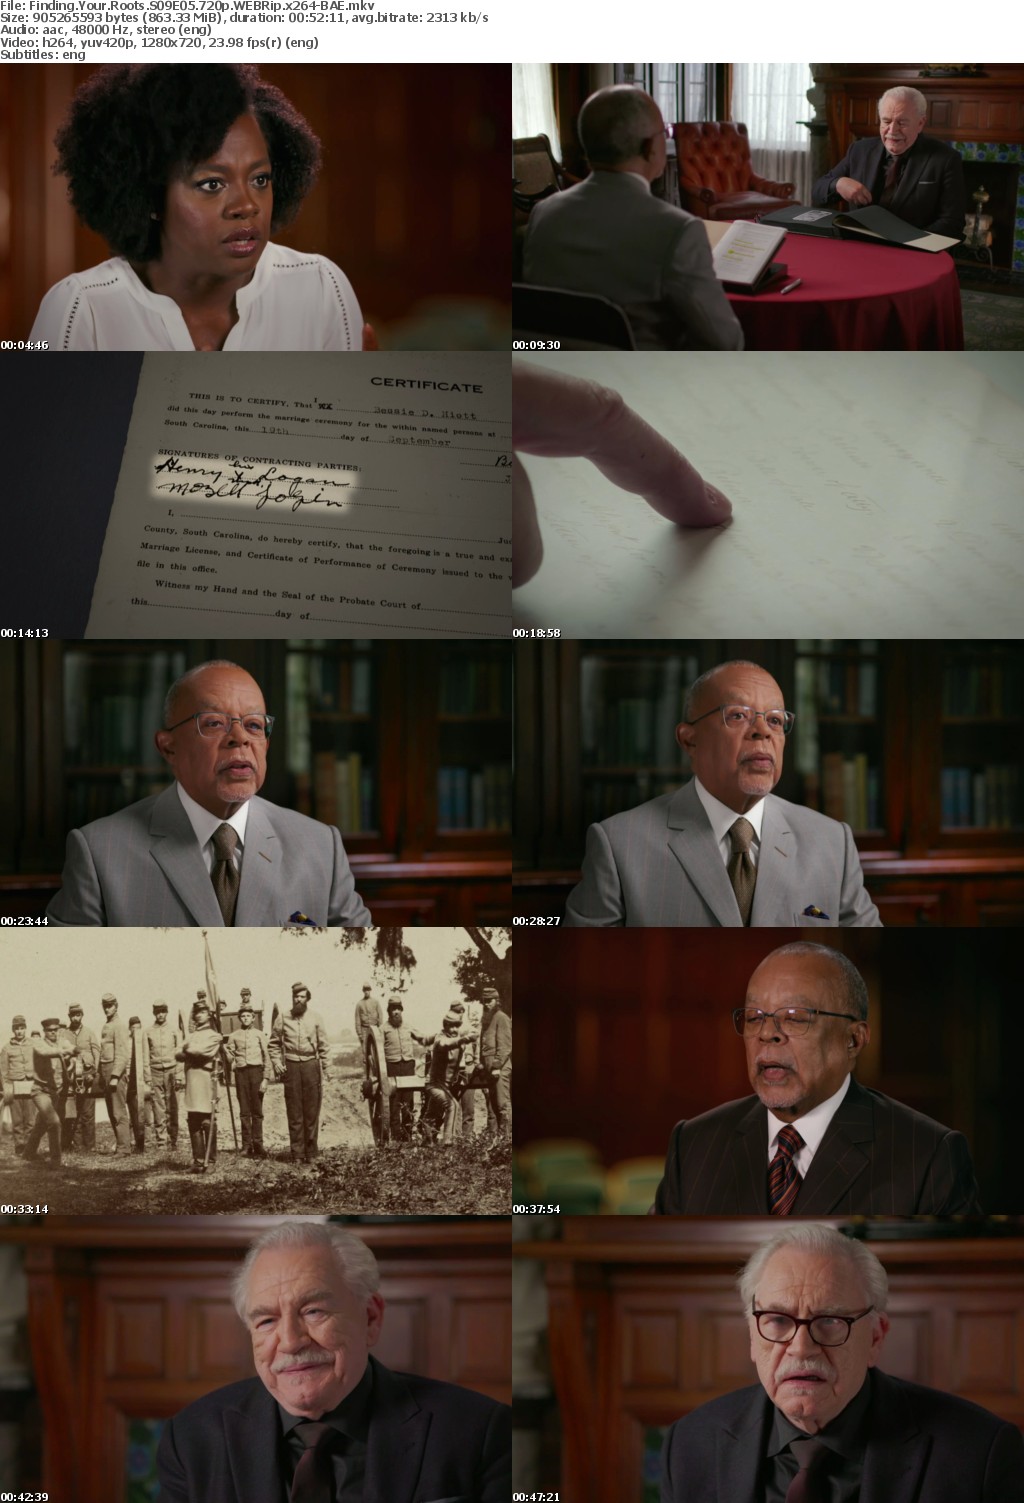 Finding Your Roots S09E05 720p WEBRip x264-BAE